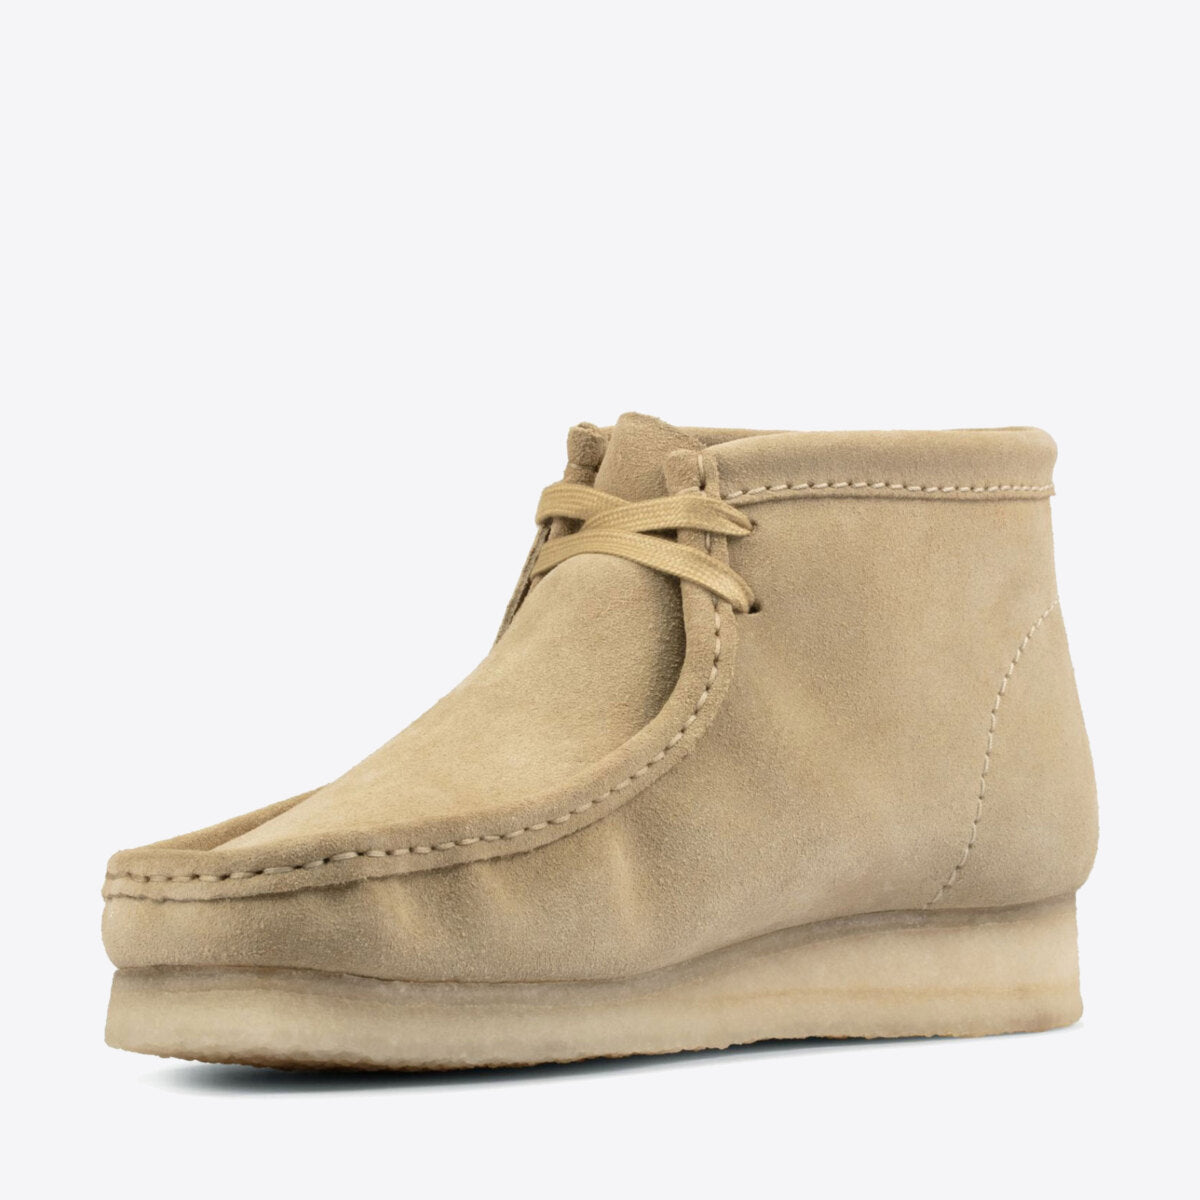 CLARKS Wallabee Boot Suede Maple - Image 4